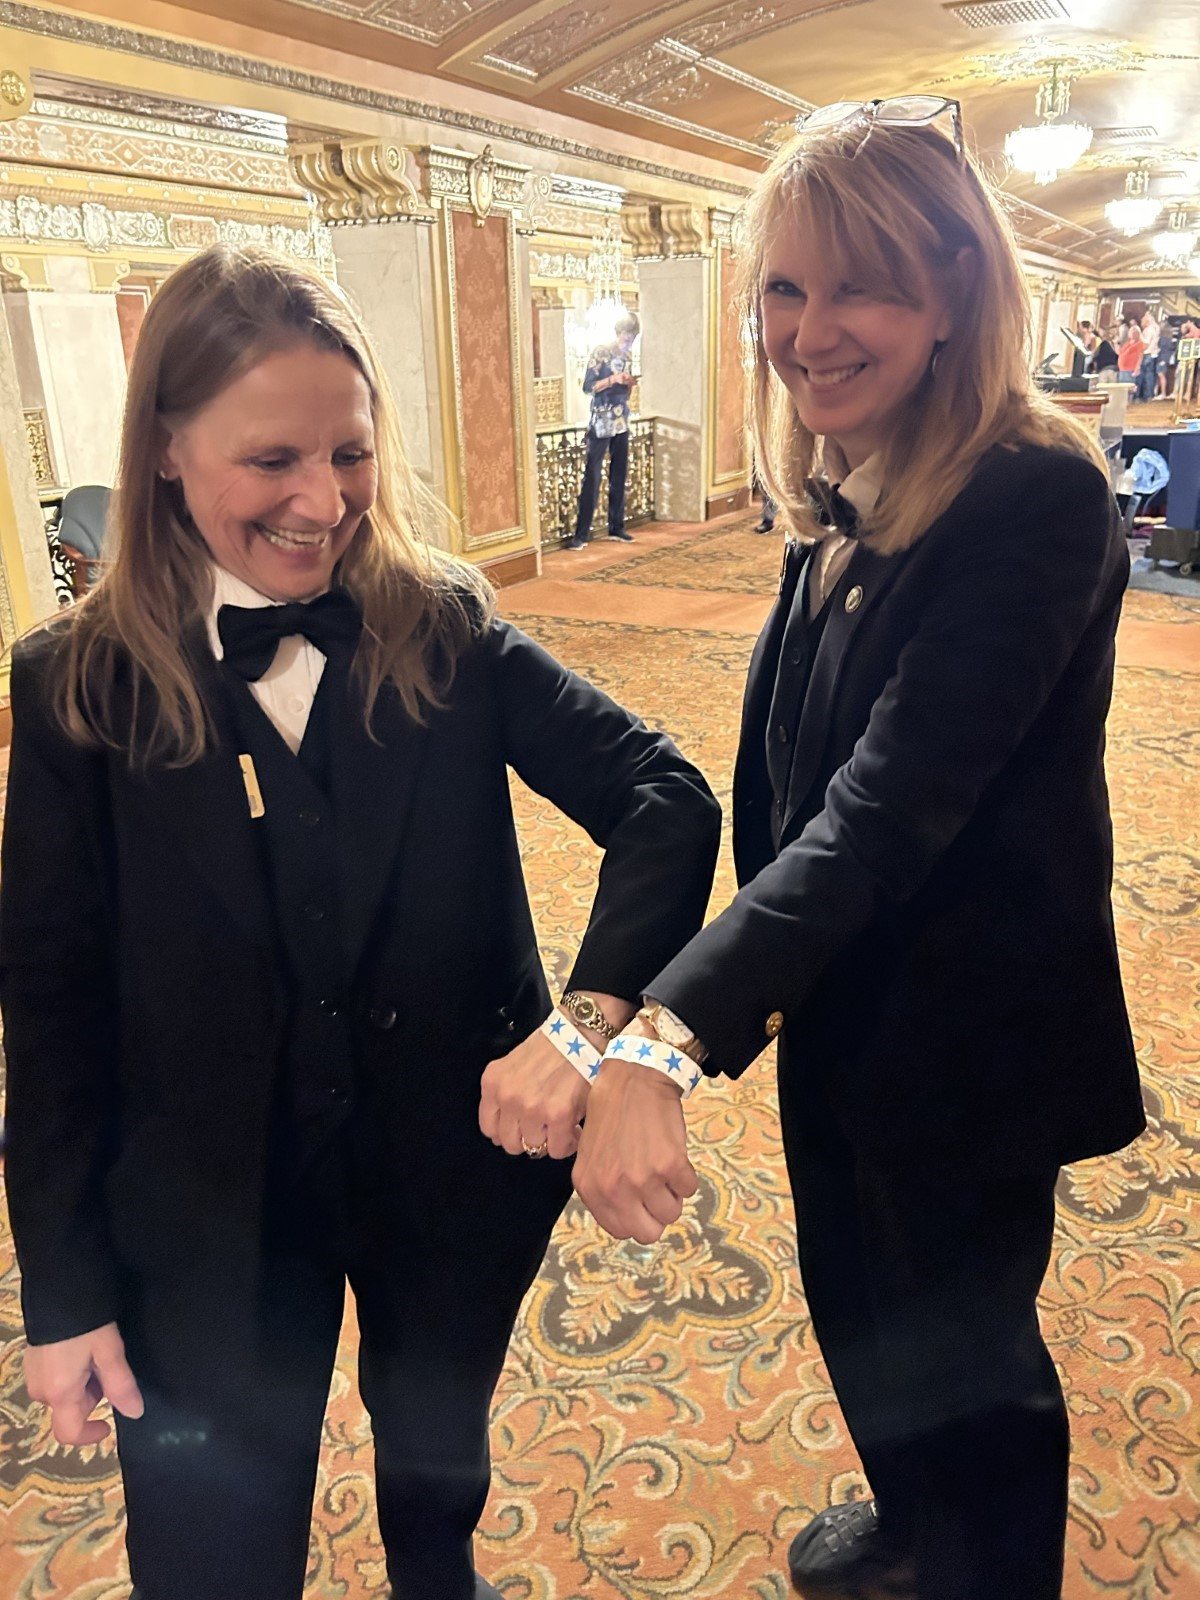 two white women in black suits smile and hold out wristbands they are wearing